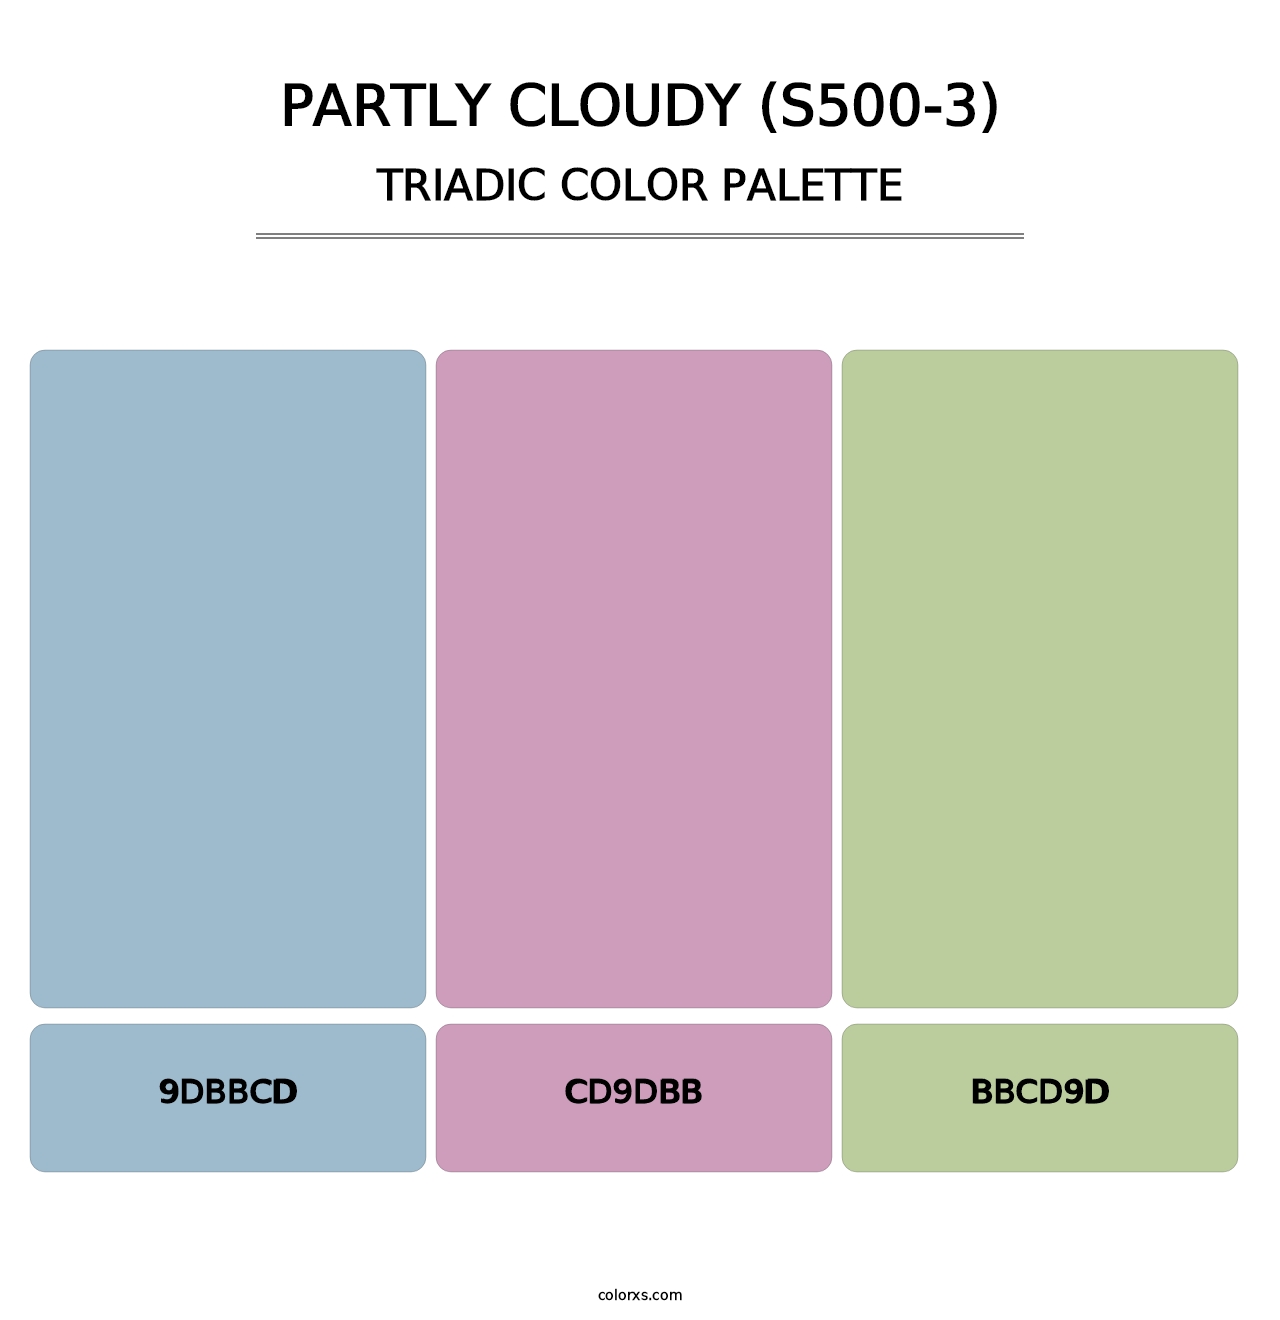 Partly Cloudy (S500-3) - Triadic Color Palette